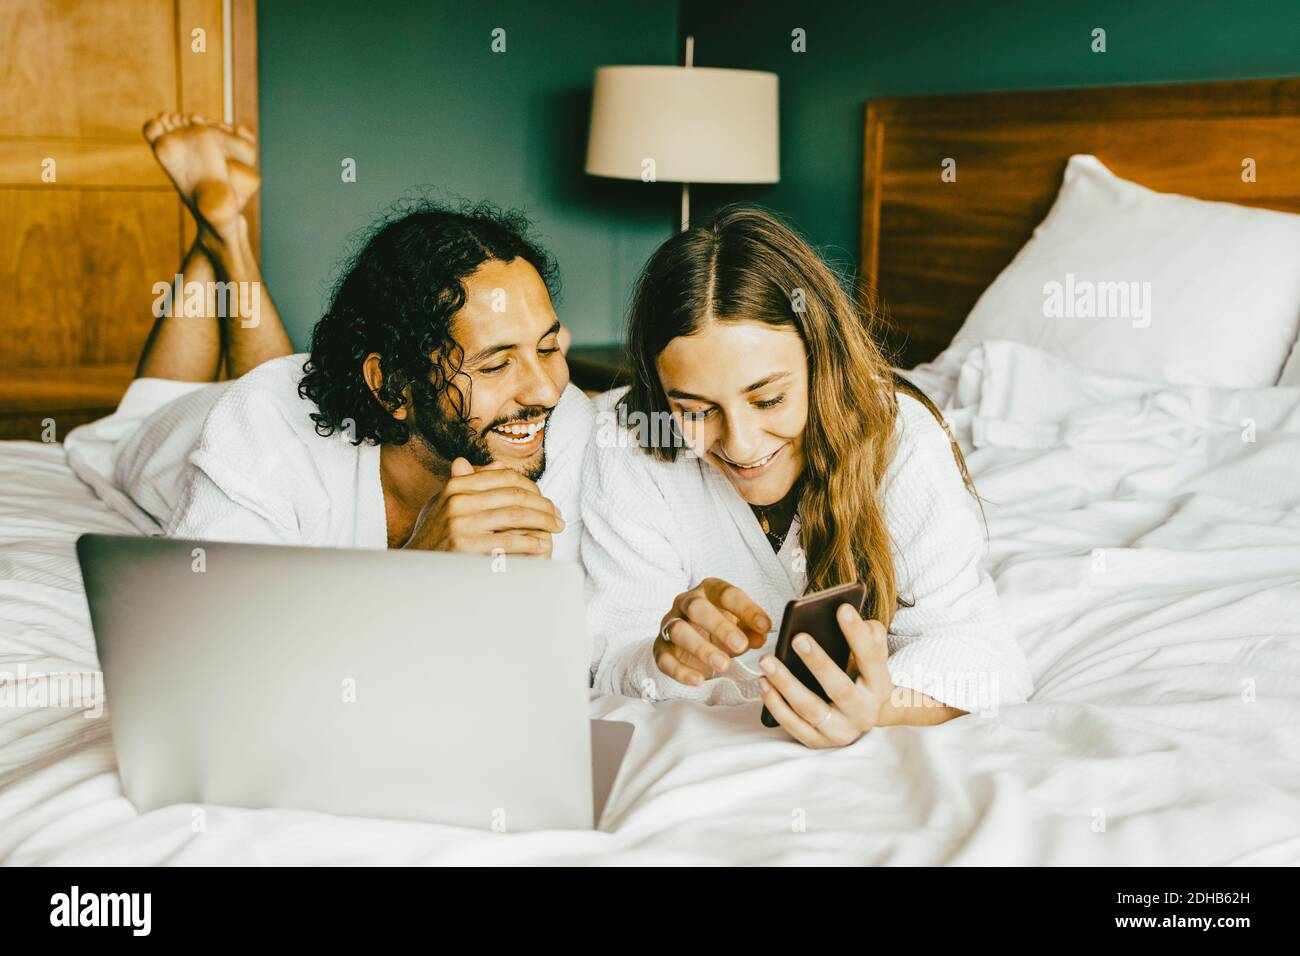 Couple in bathrobe with laptop using phone while lying on bed at hotel room Stock Photo